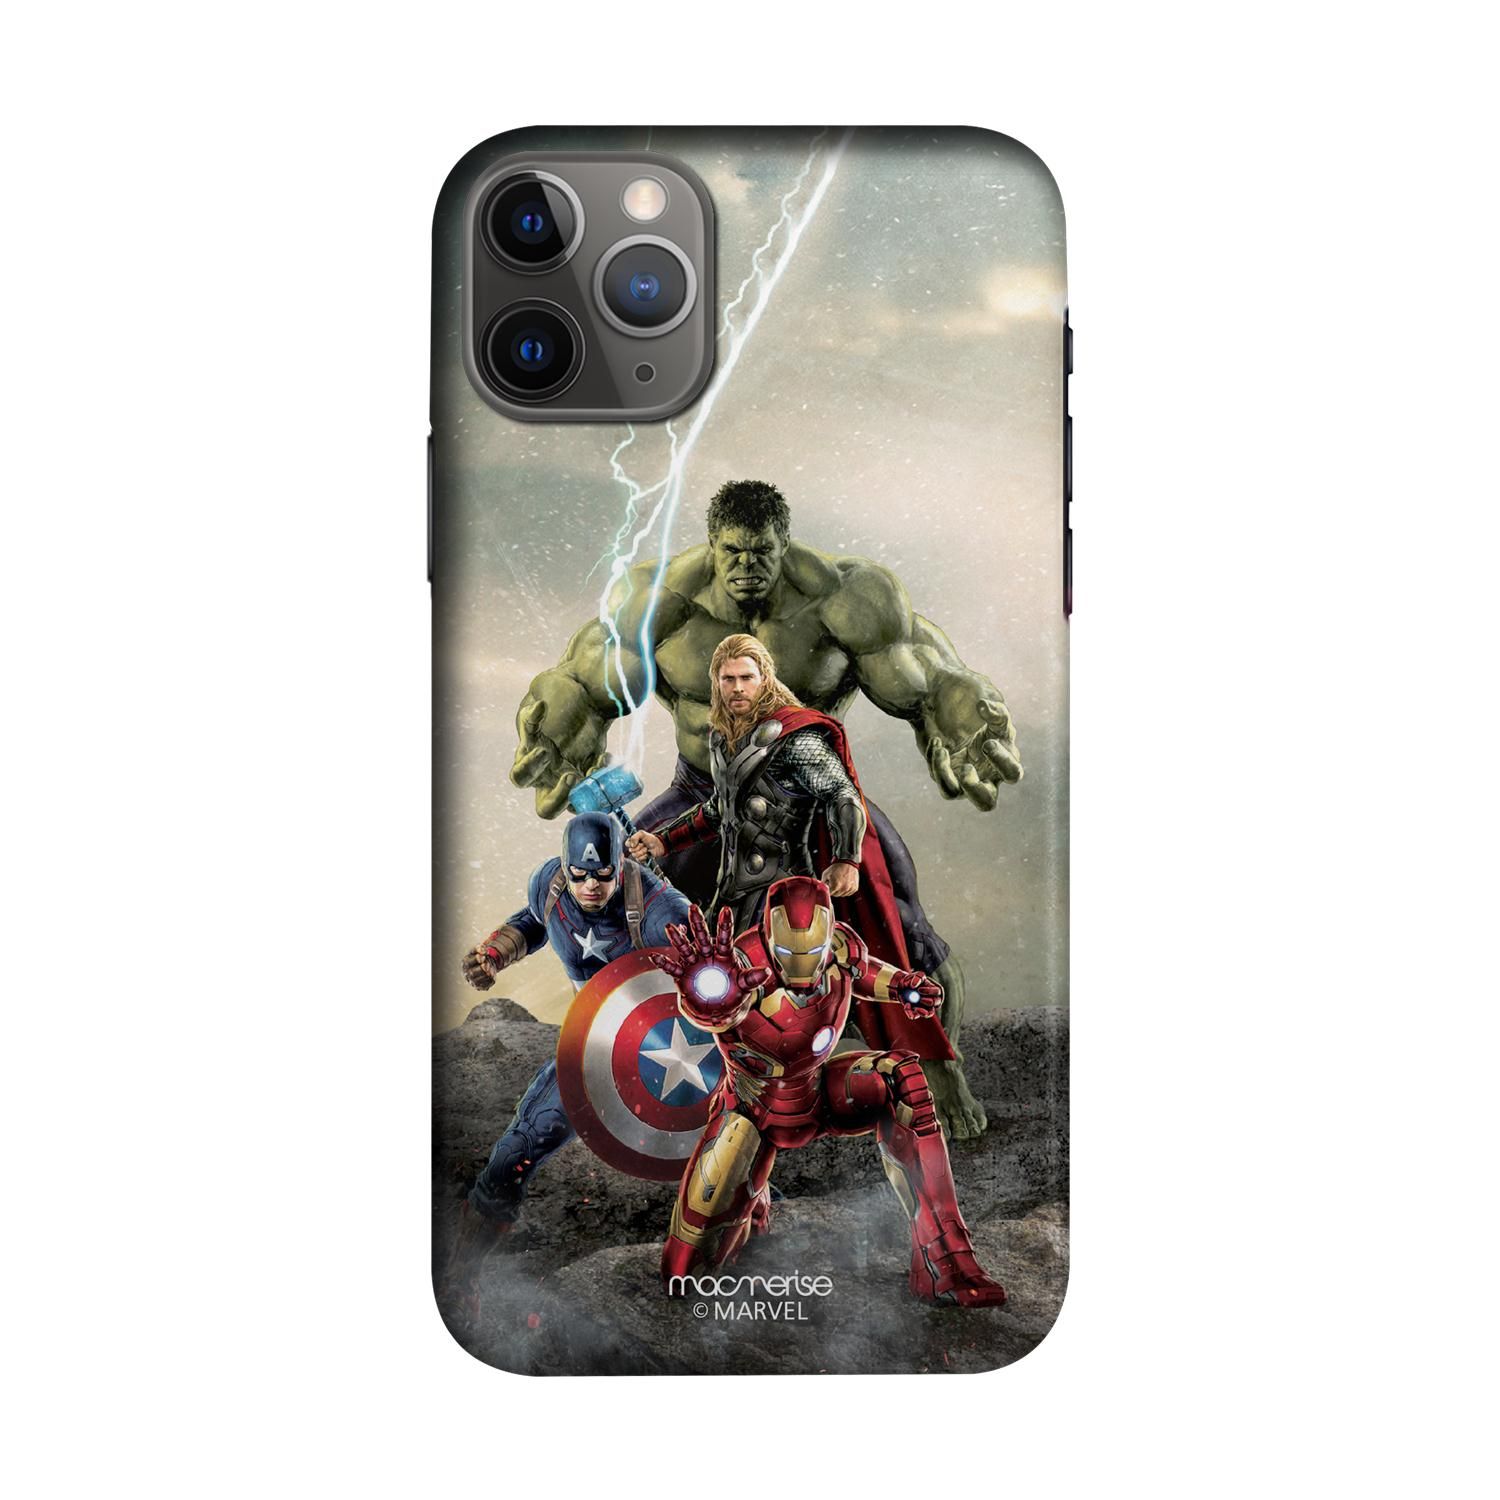 Buy Time to Avenge - Sleek Phone Case for iPhone 11 Pro Online